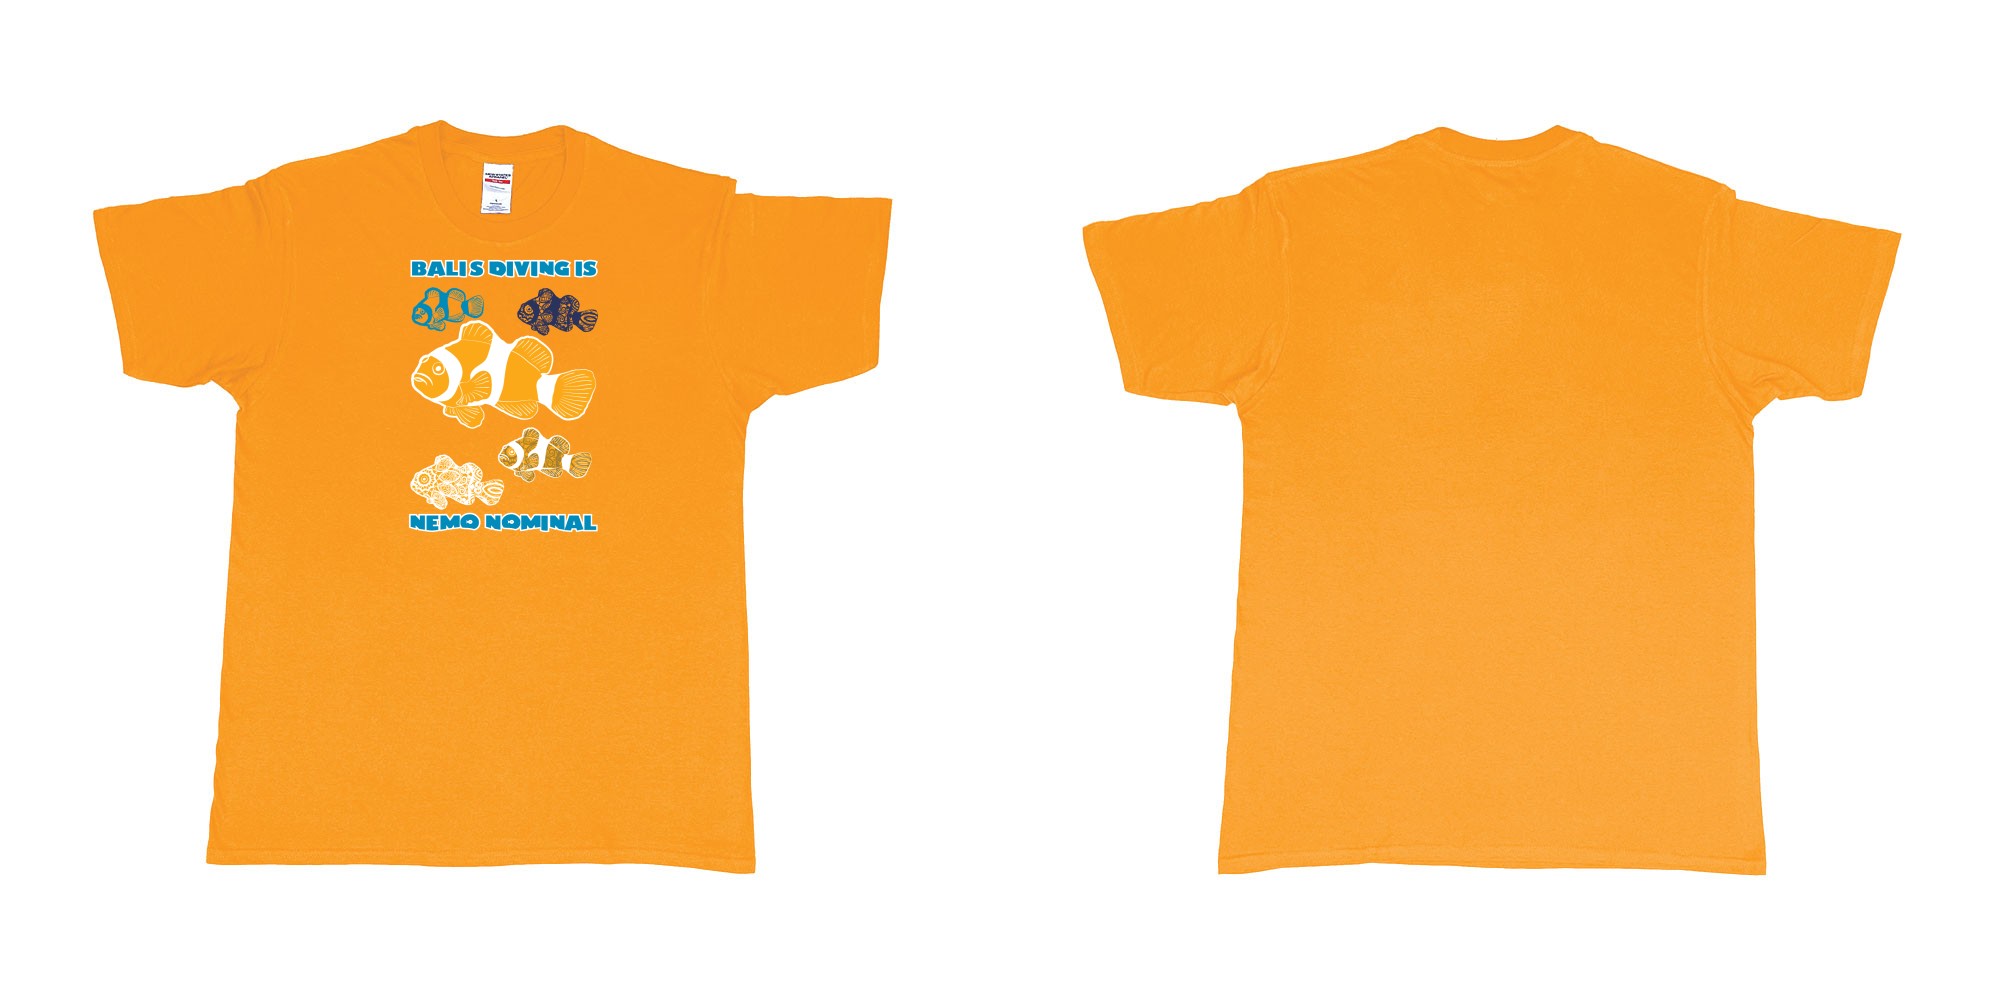 Custom tshirt design bali diving is nemo nominal in fabric color gold choice your own text made in Bali by The Pirate Way